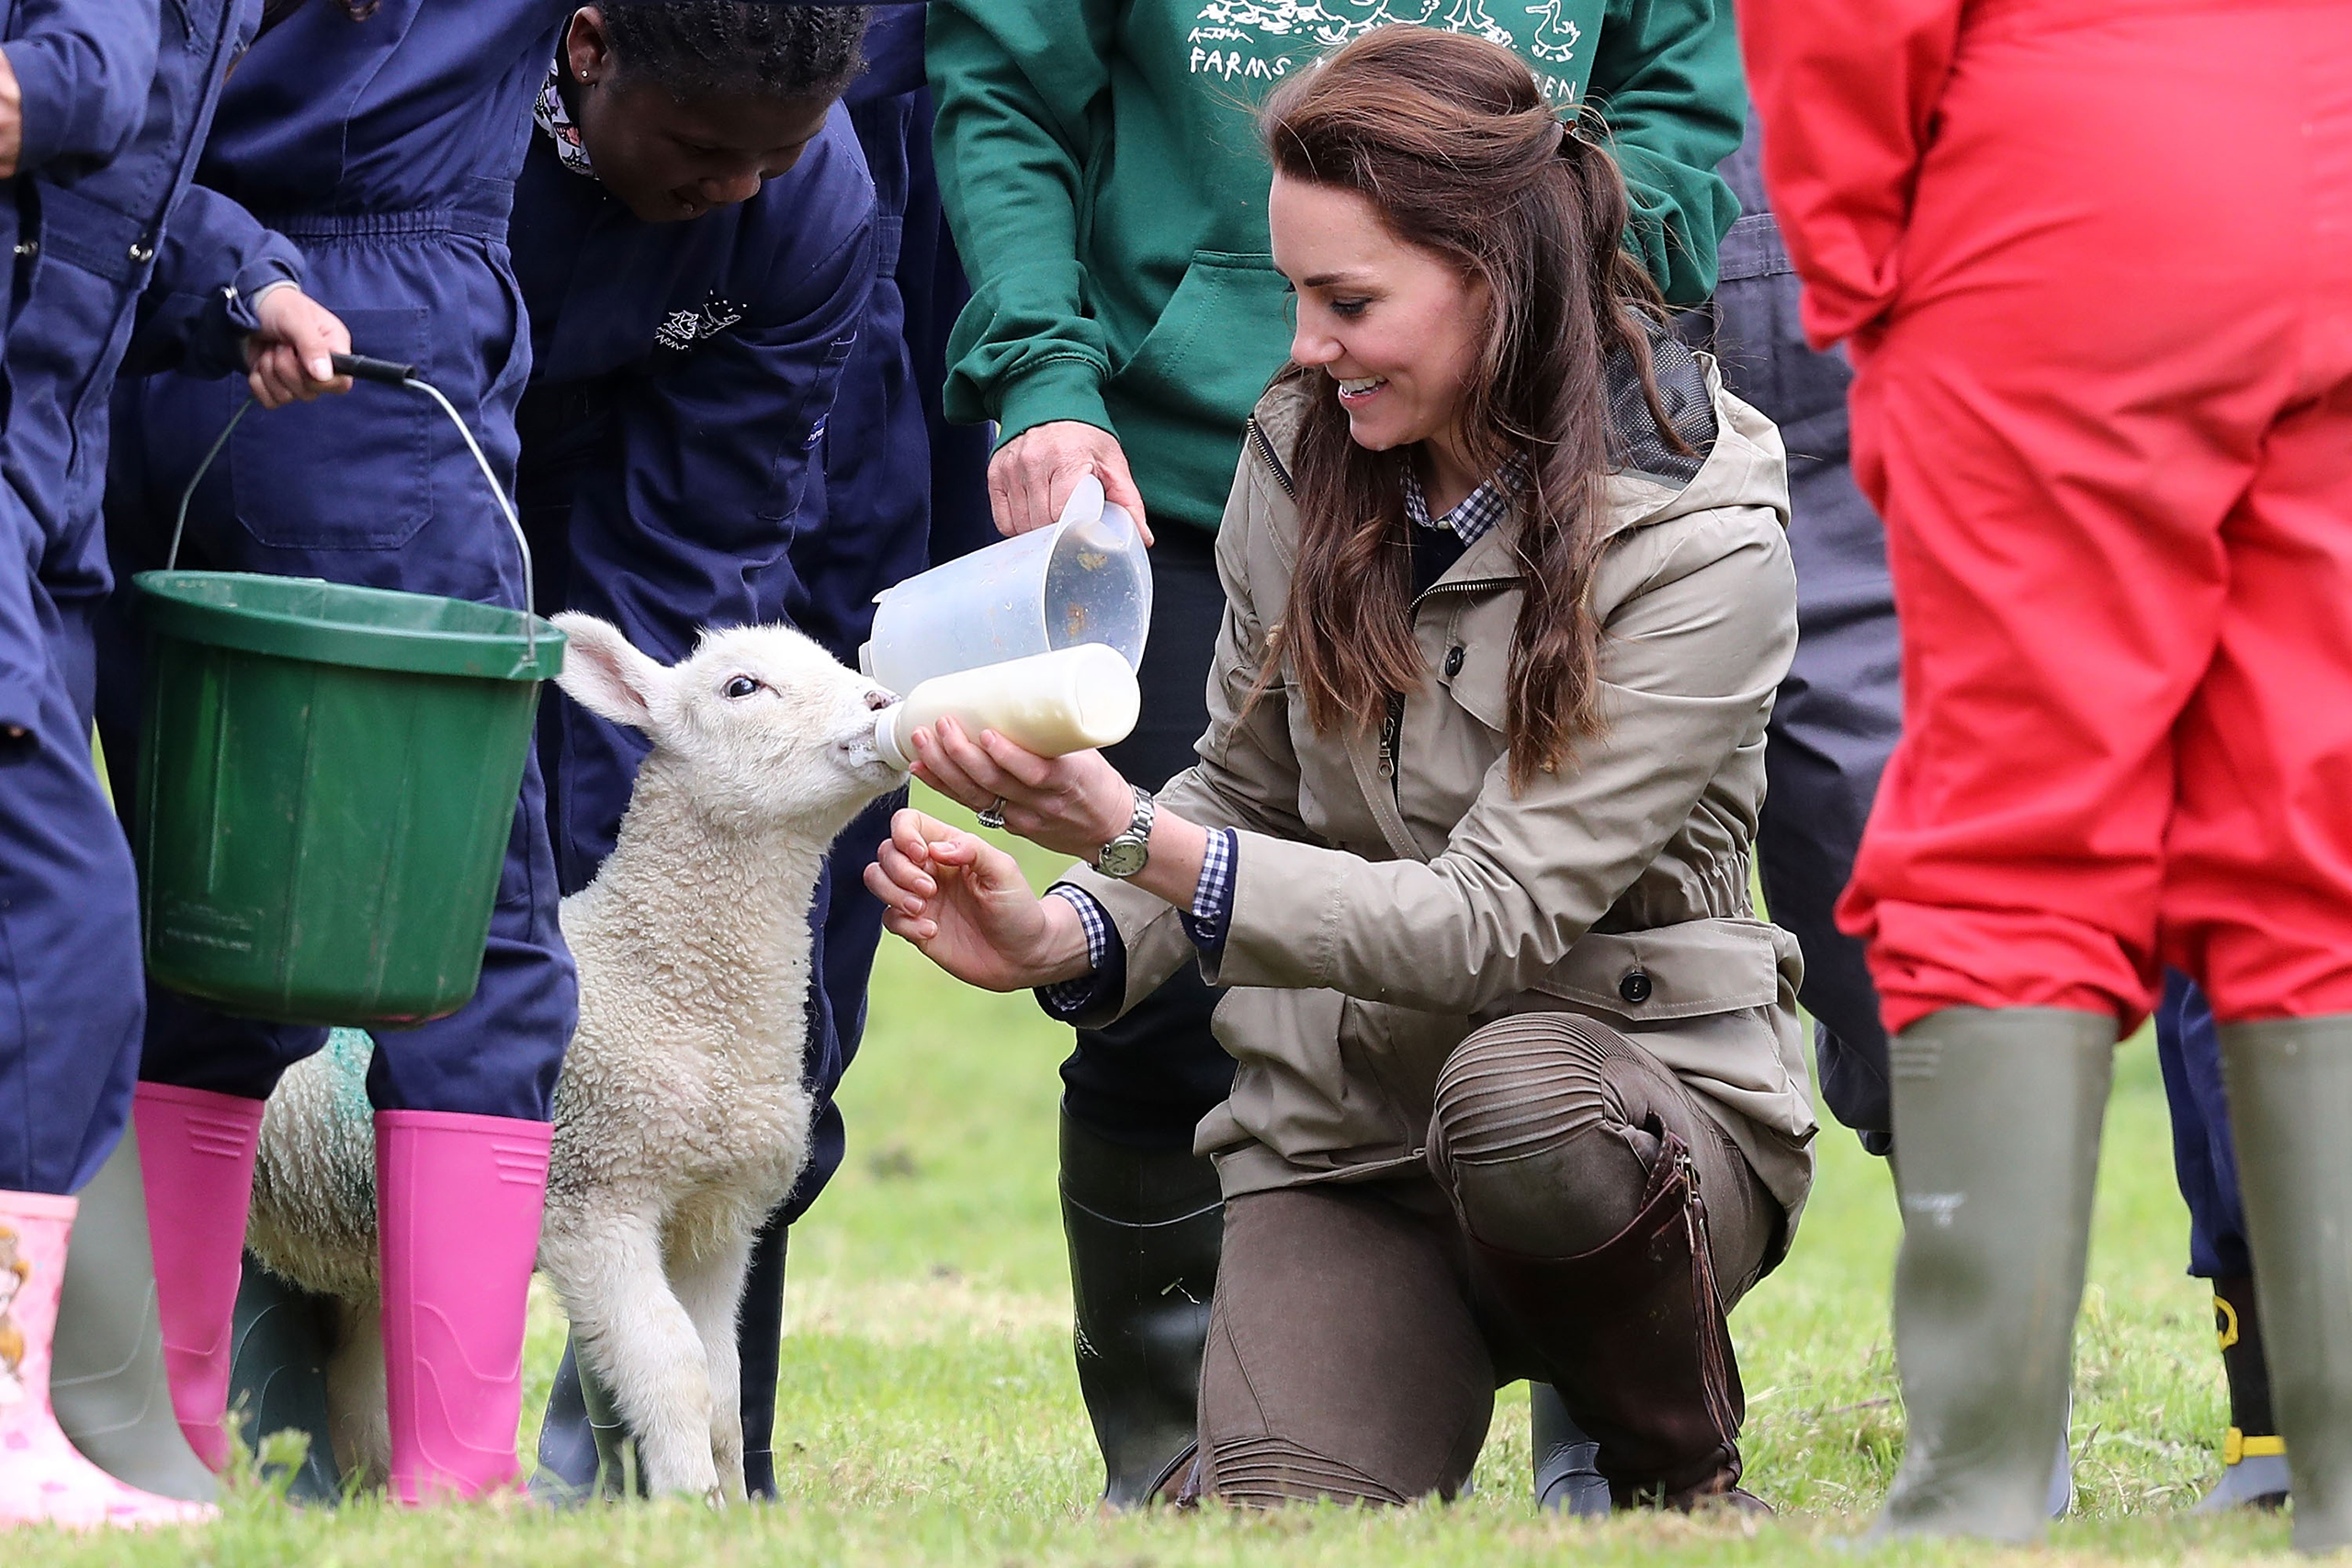 Catherine, Duchess of Cambridge feeds "Stinky" the lamb during a visit to Author Michael Morpurgo's Farms for City Children in Arlingham, Gloucestershire, on May 3, 2017. (Matt Cardy—Getty Images)